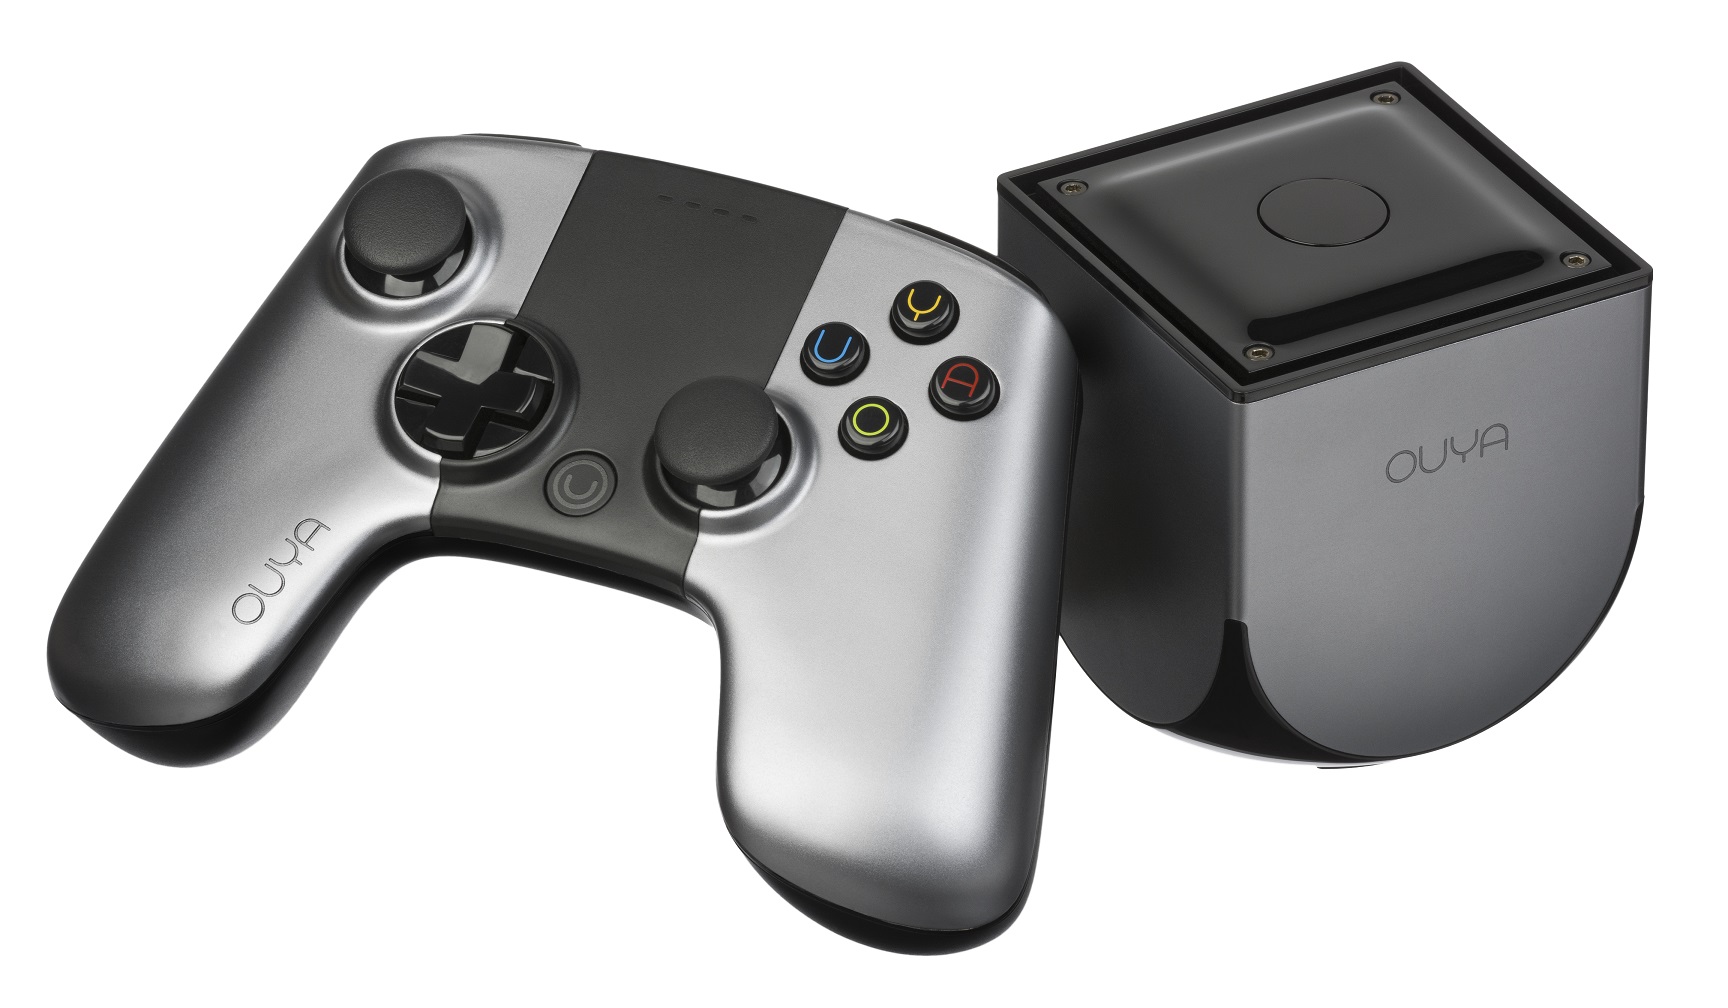 The Ouya is a Kickstarter funded gaming console that runs on Android.